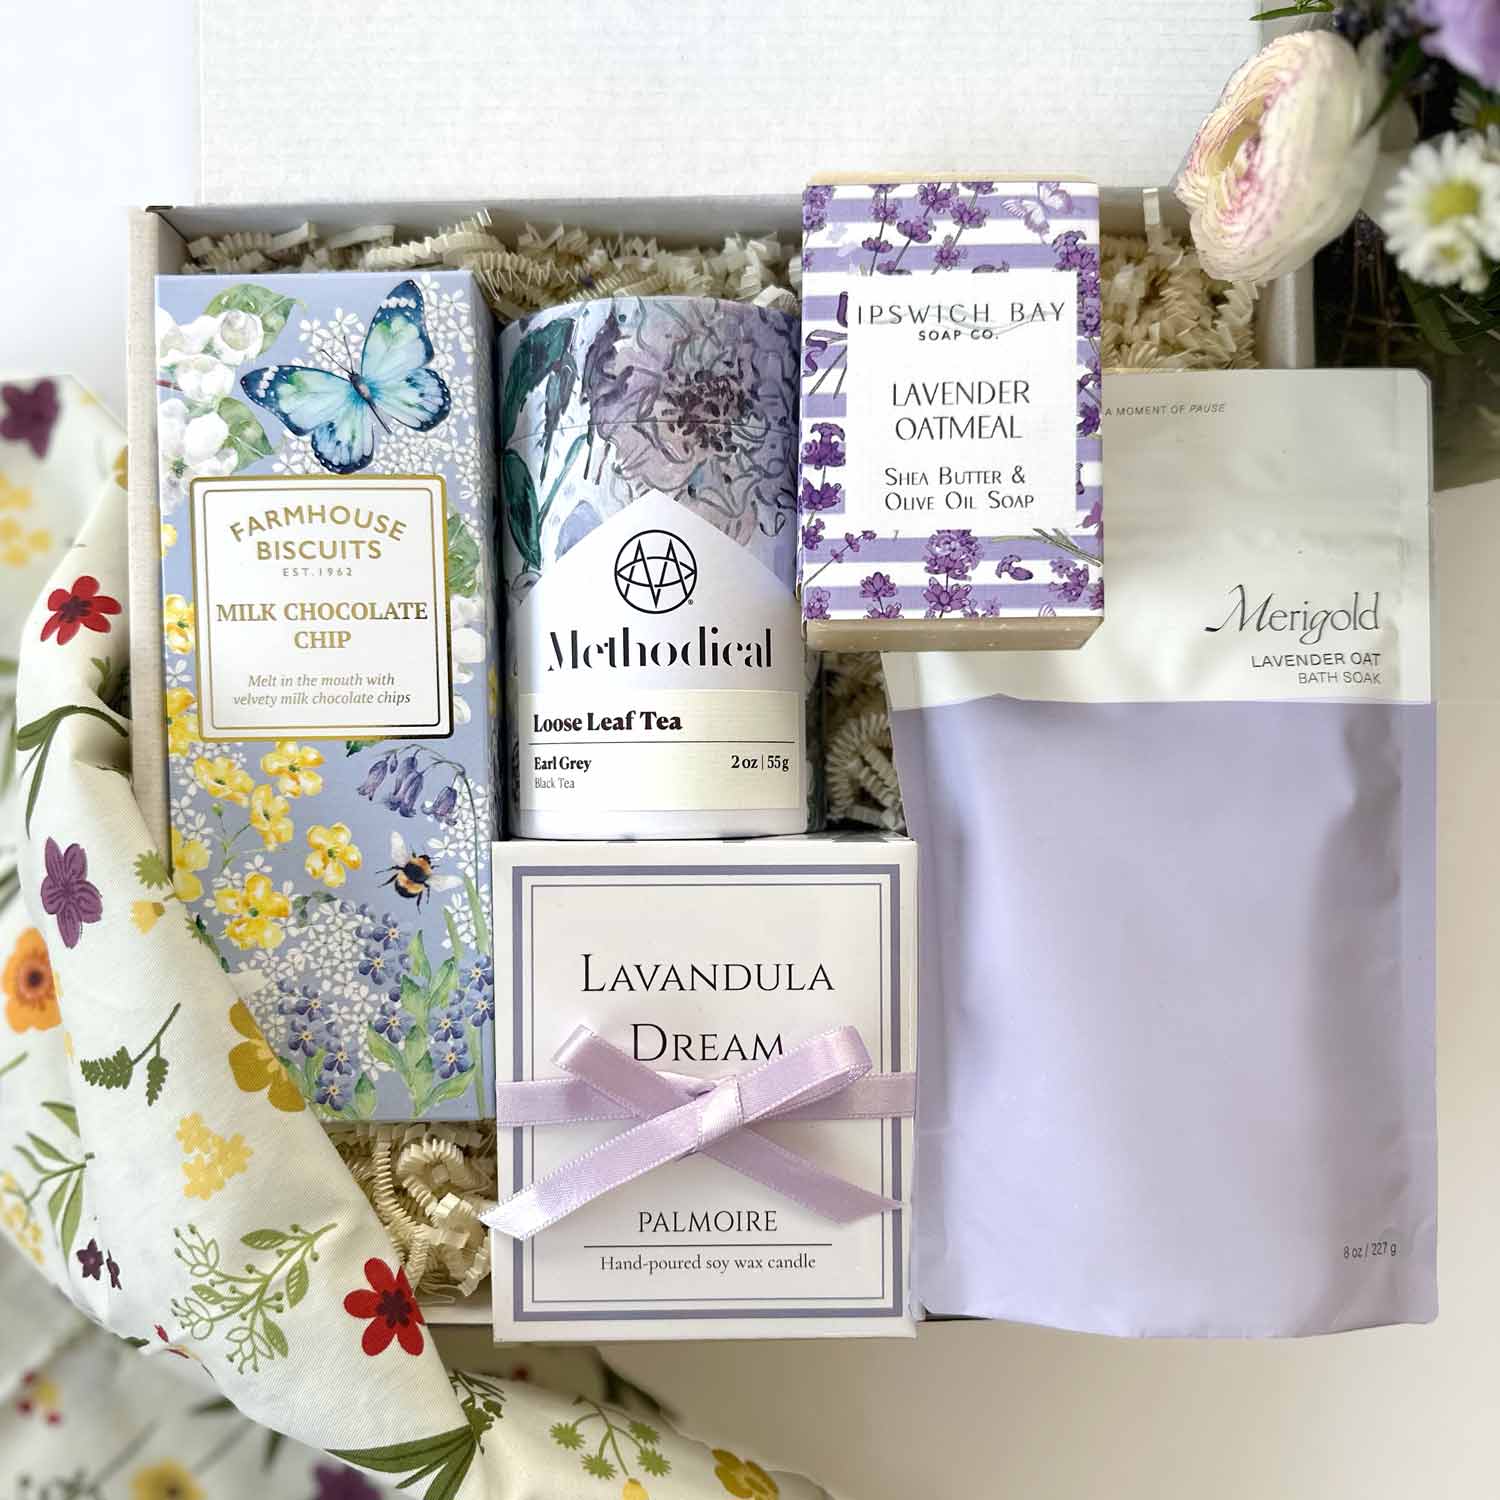 kadoo lavender dream curated spa gift box for her. Gift items included milk chocolate chip cookies, loose tea, candle, soap, bath soak and more